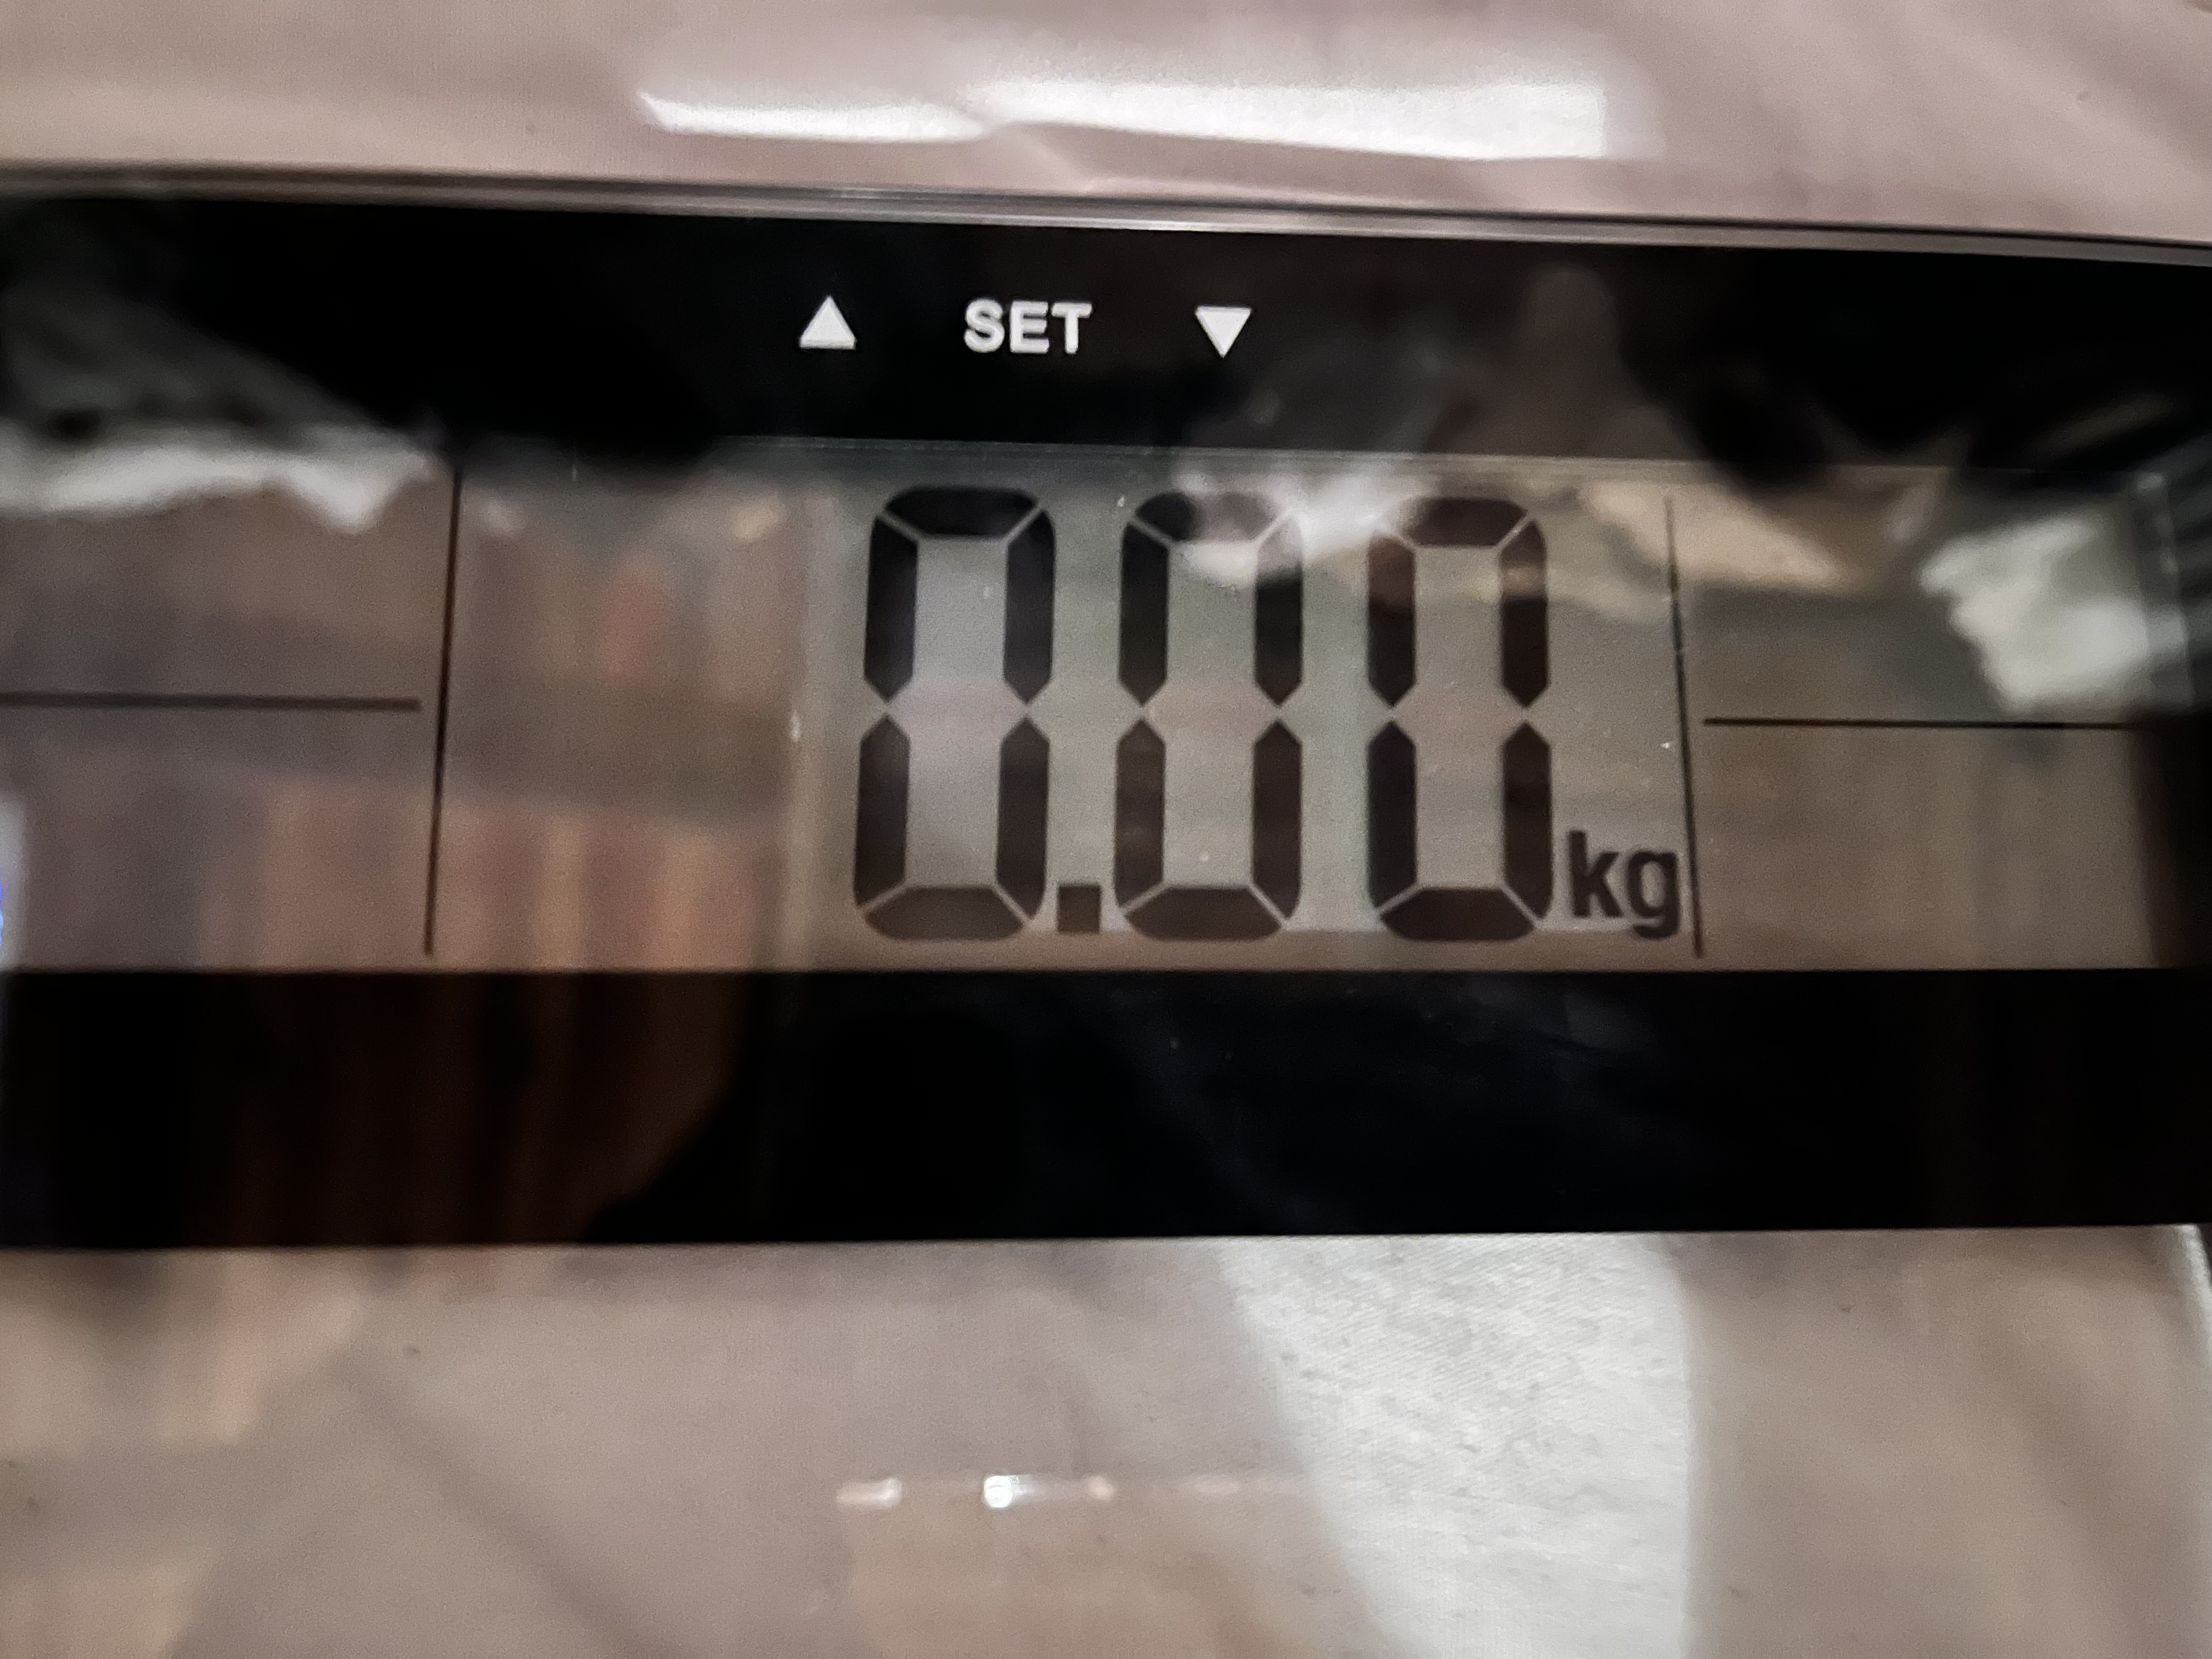 My scale only shows 0.00, its placed in a perfeCt surface and new batteries.